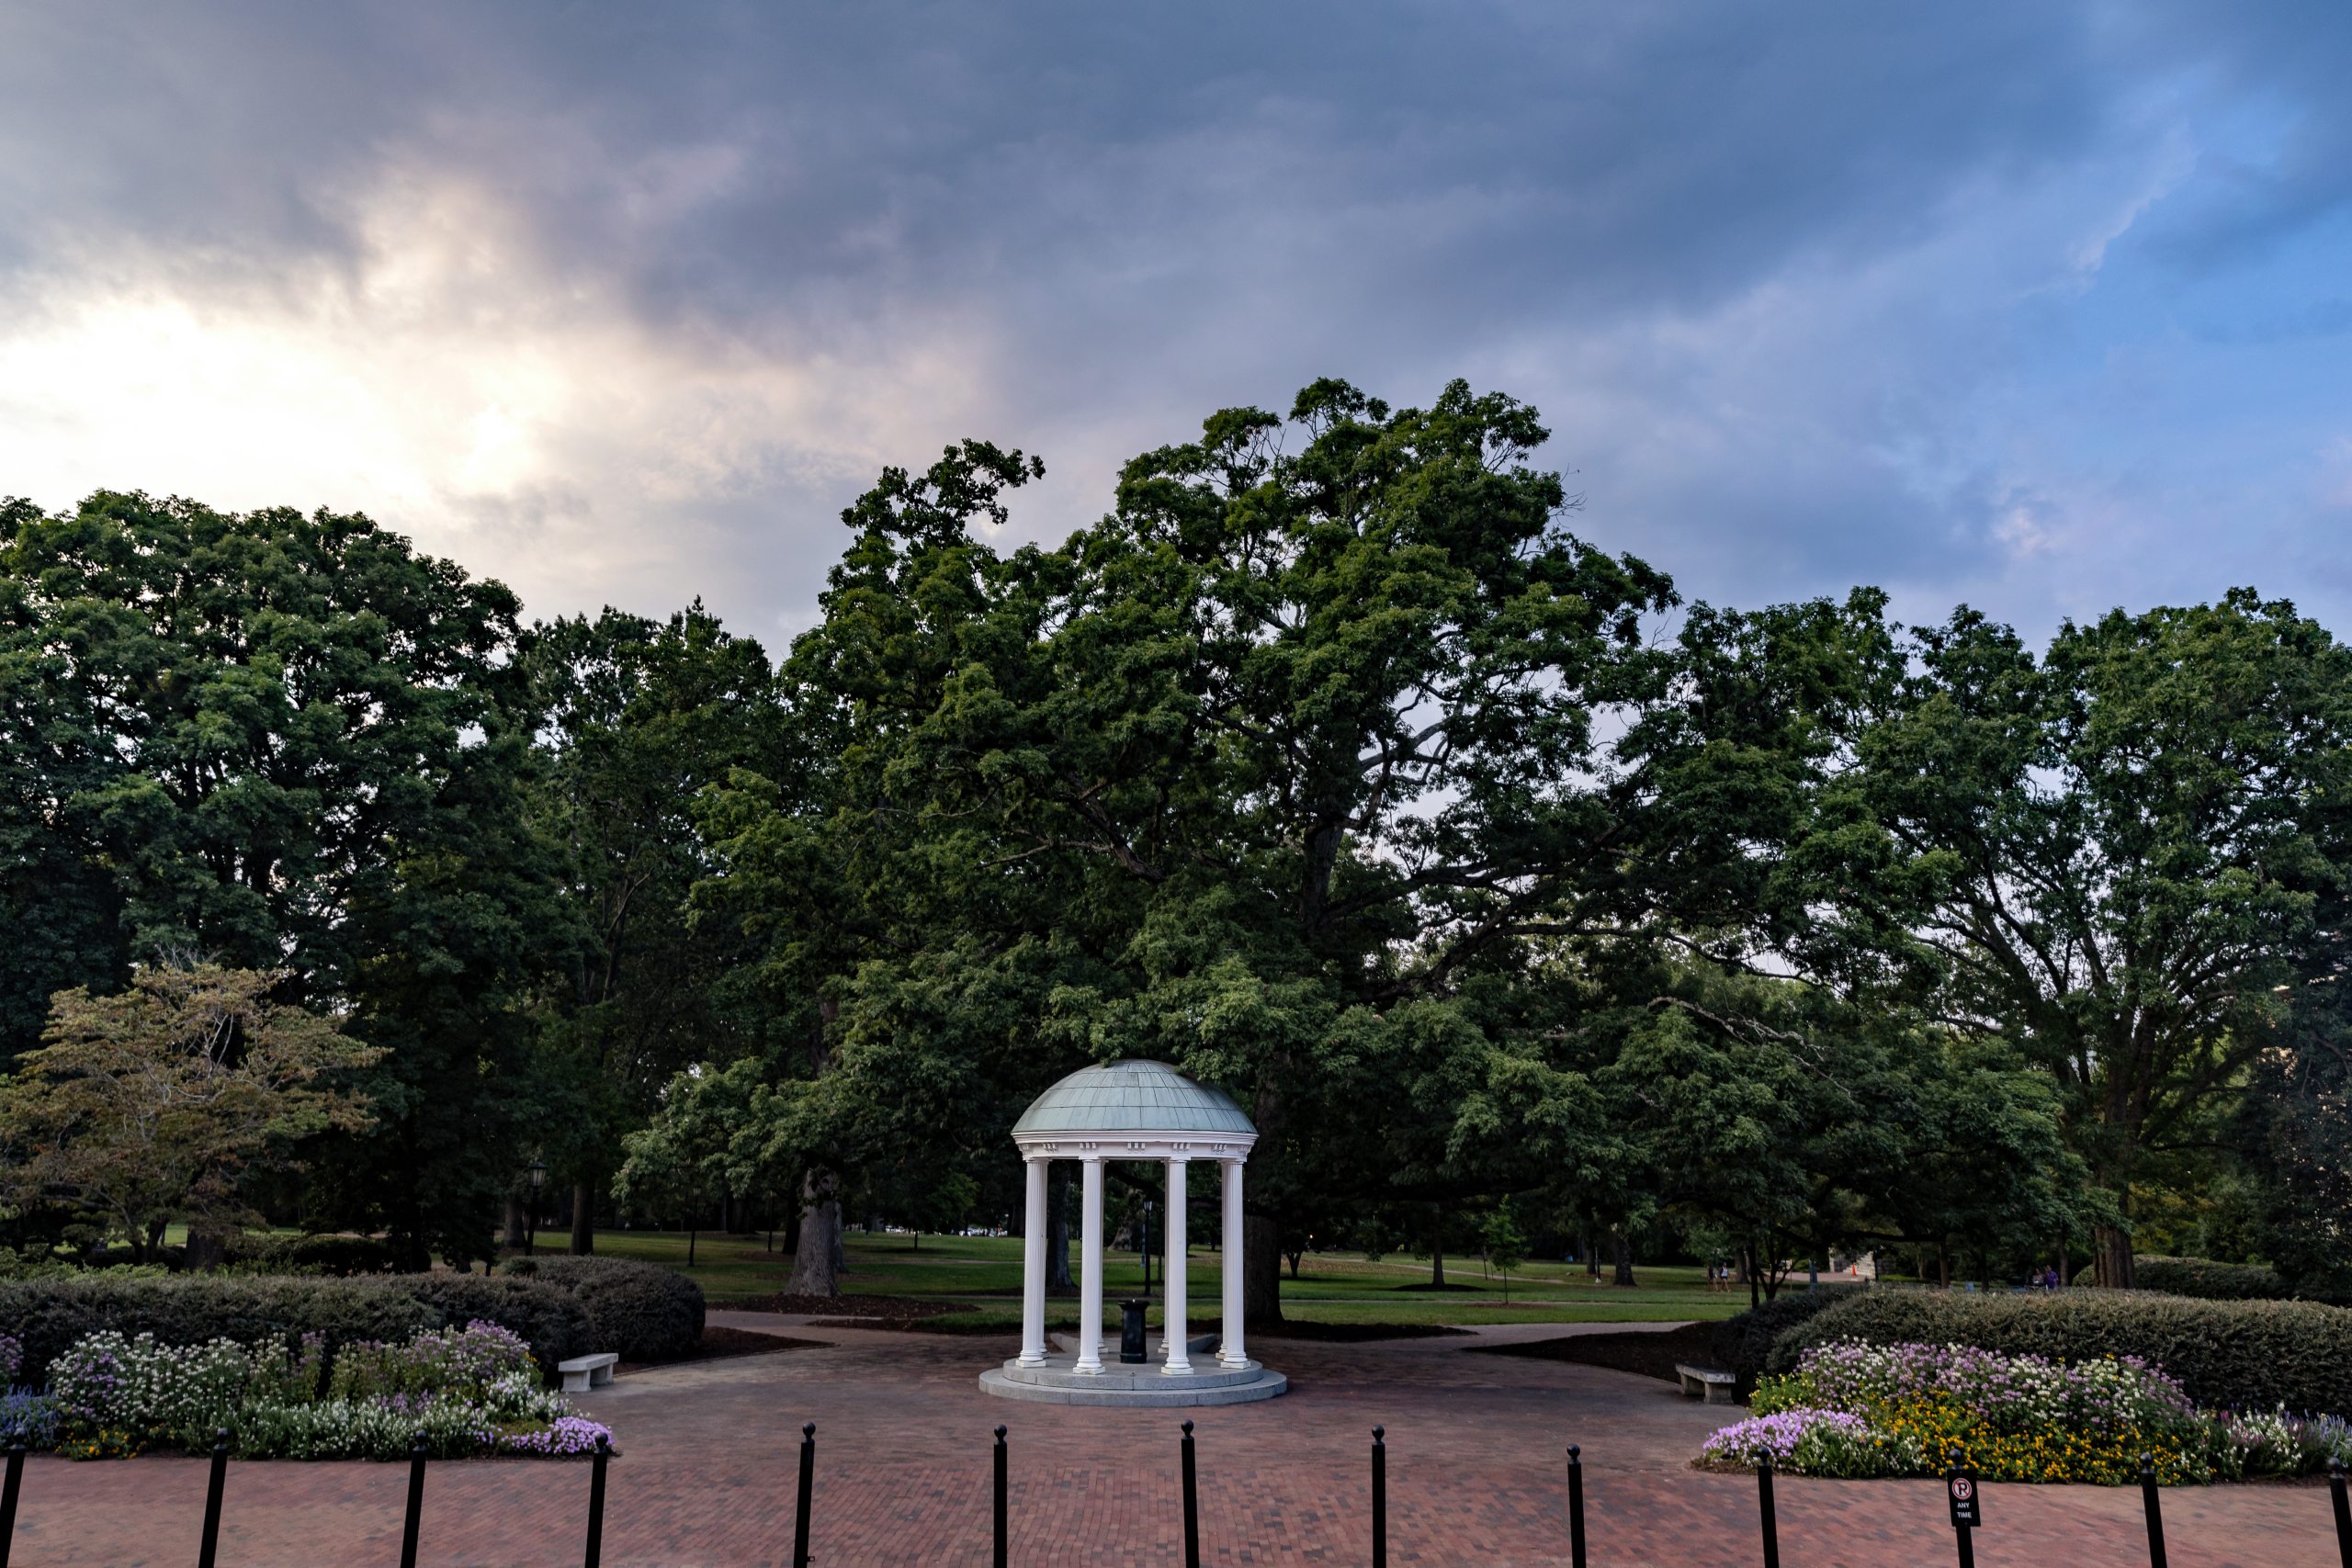 View of the Old Well on the campus of the University of North Carolina at Chapel Hill.